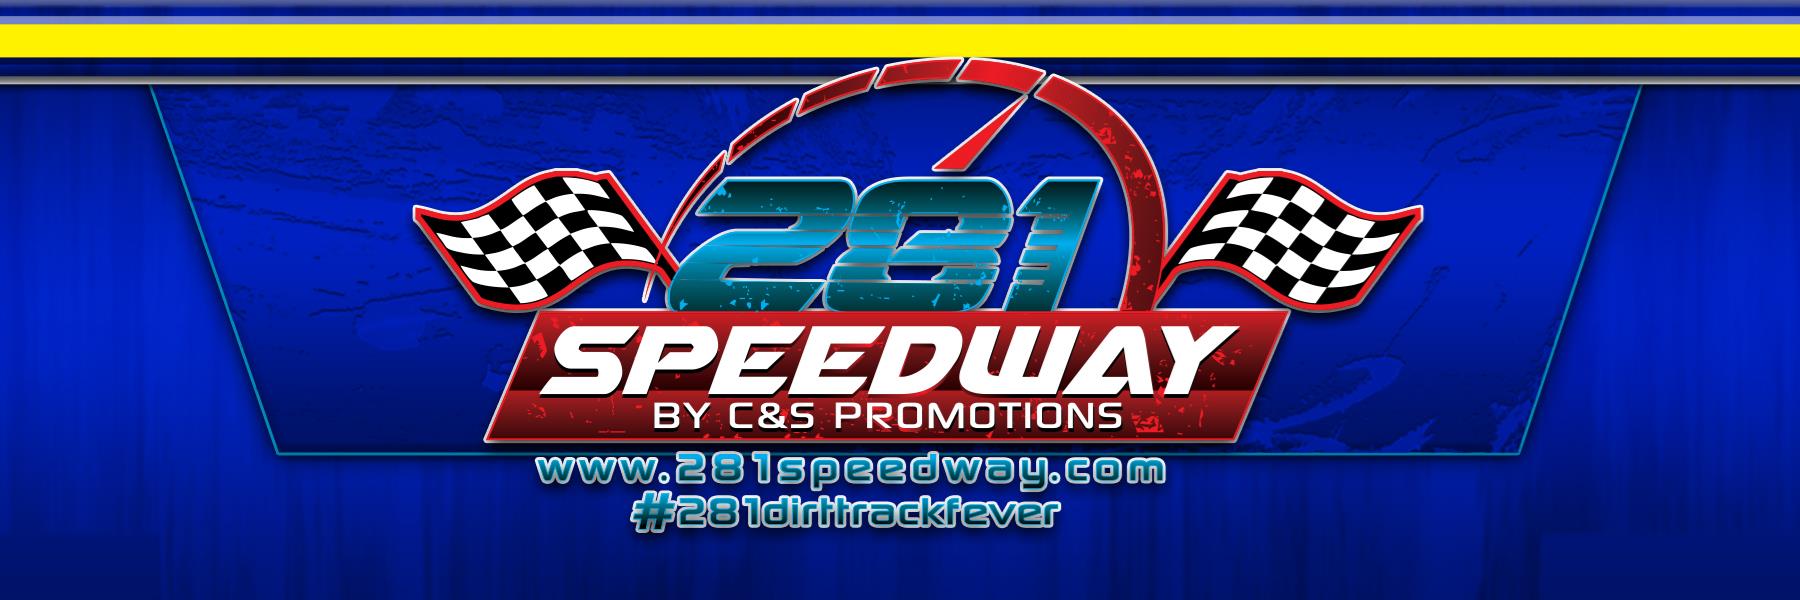 7/25/2015 - 281 Speedway by C&S Promotions